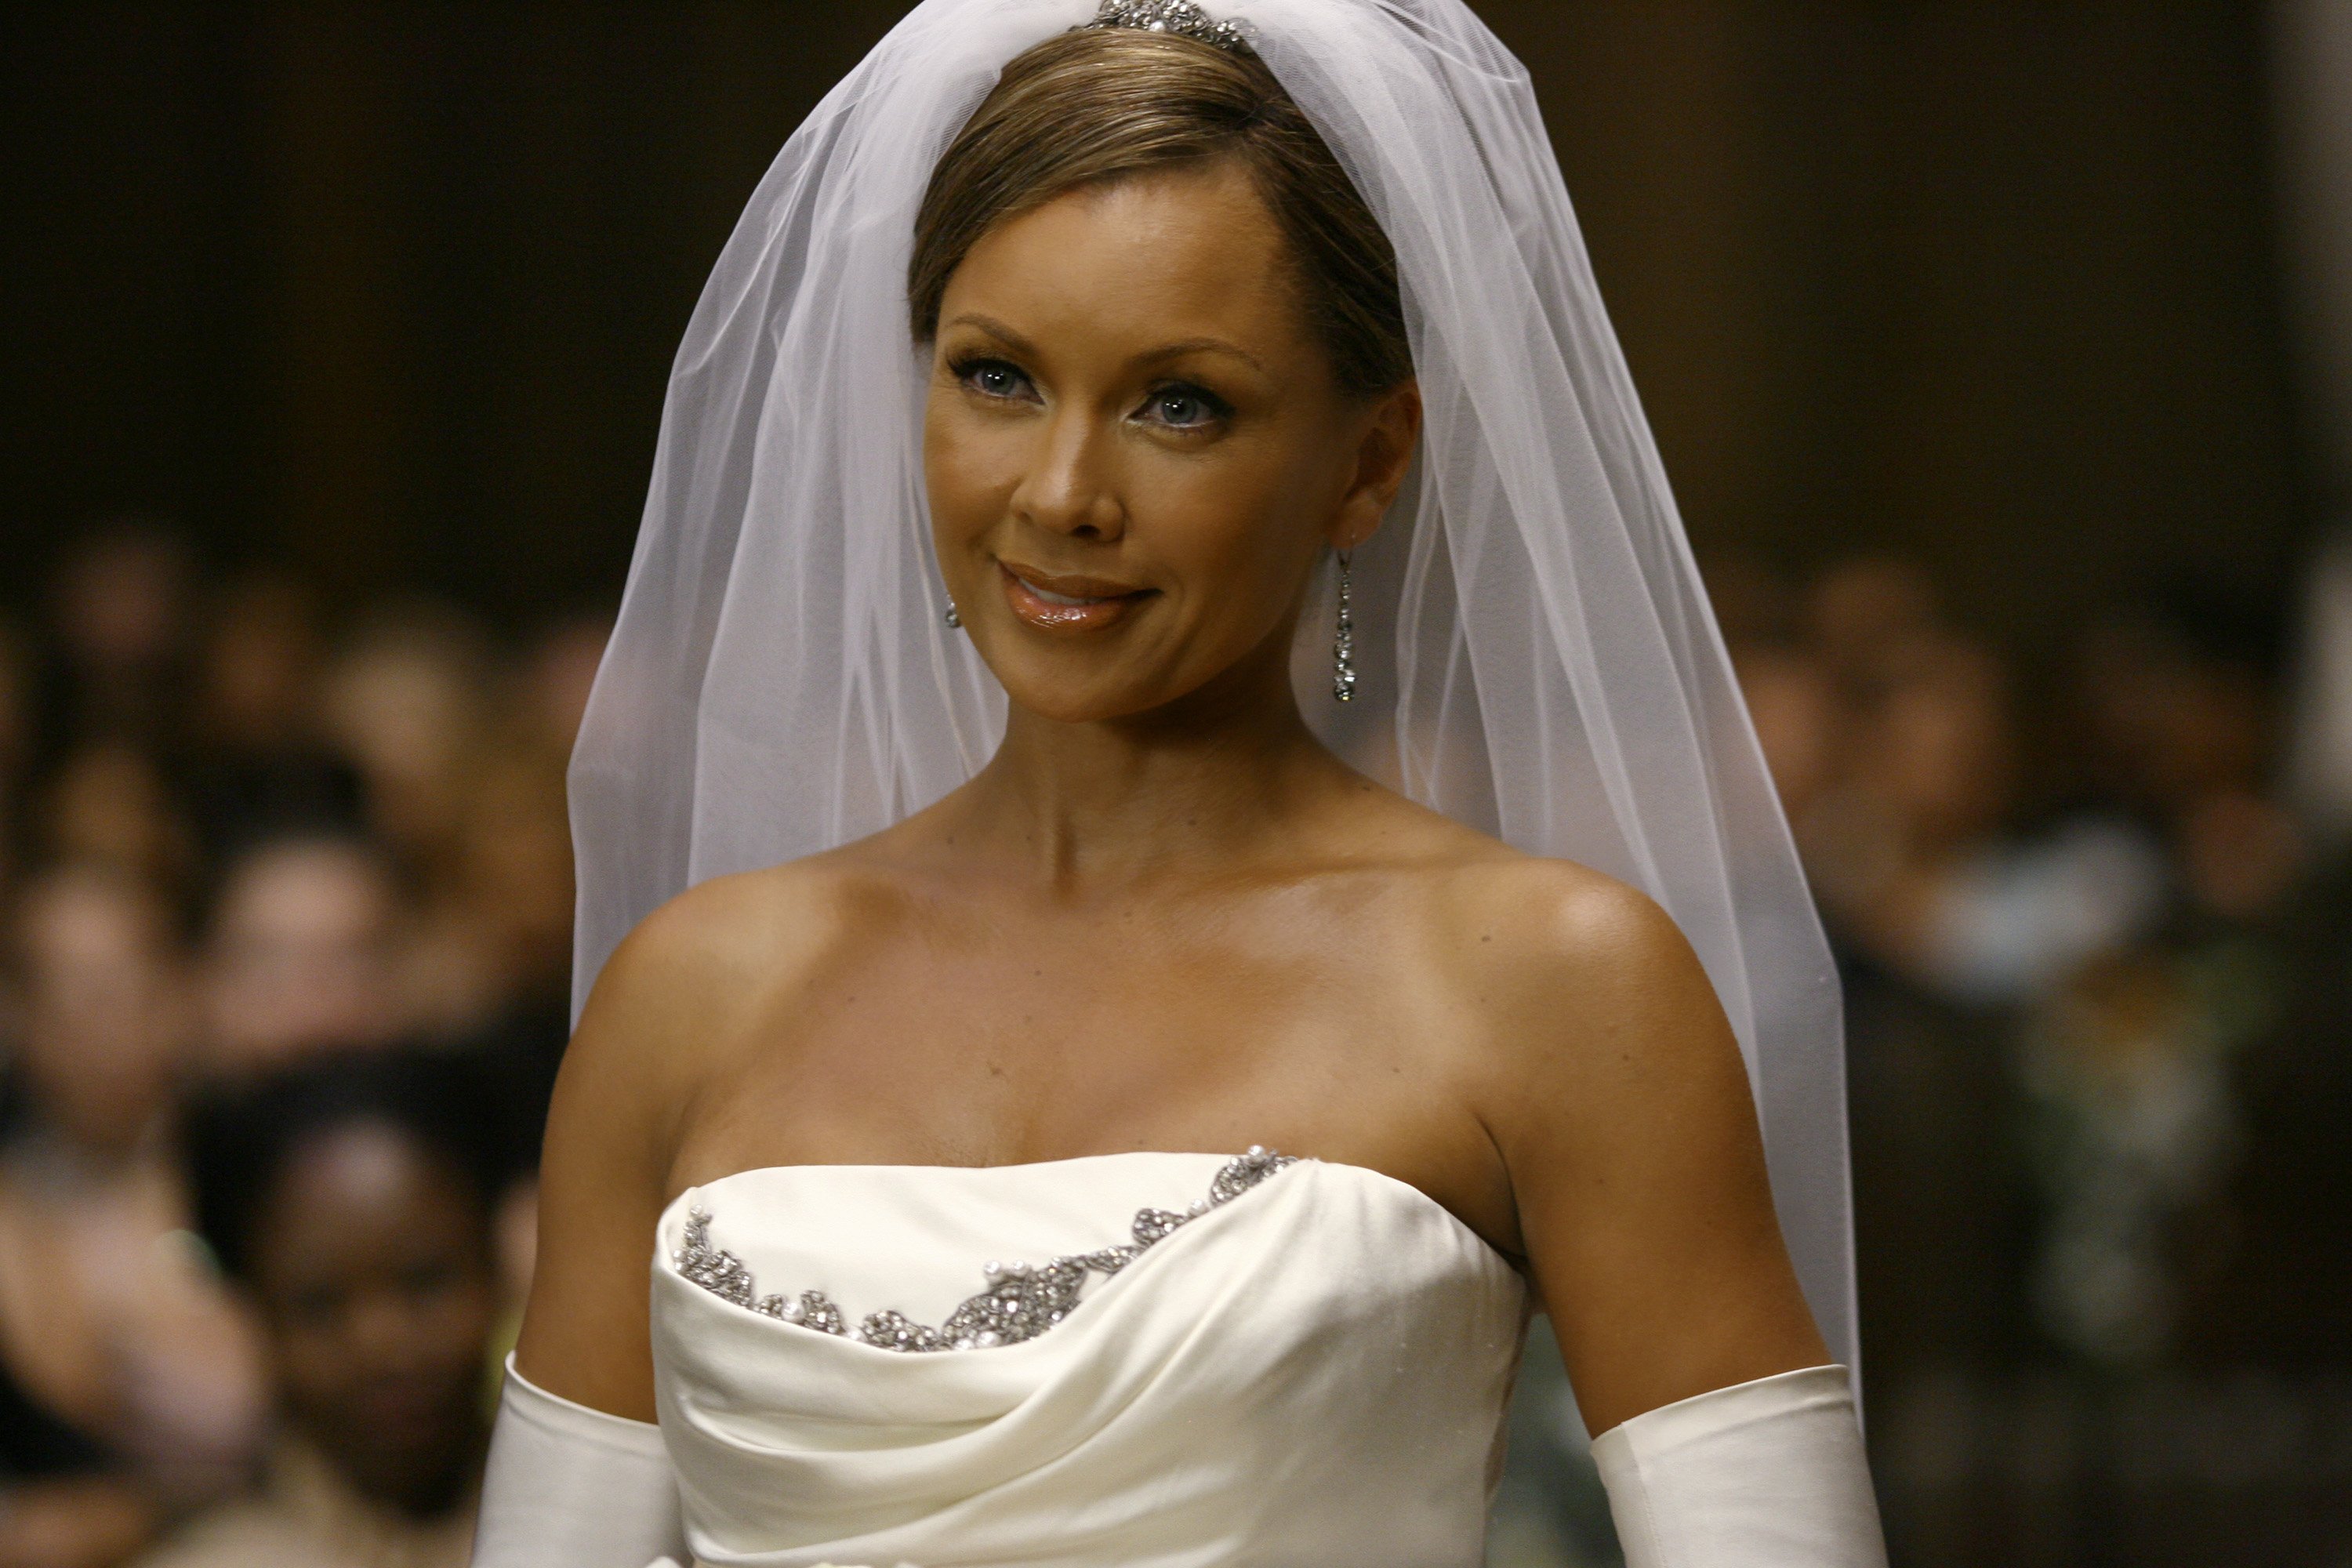 Singer Vanessa Williams as Wilhelmina Slater in the drama series "Ugly Betty.┃Source: Getty Images